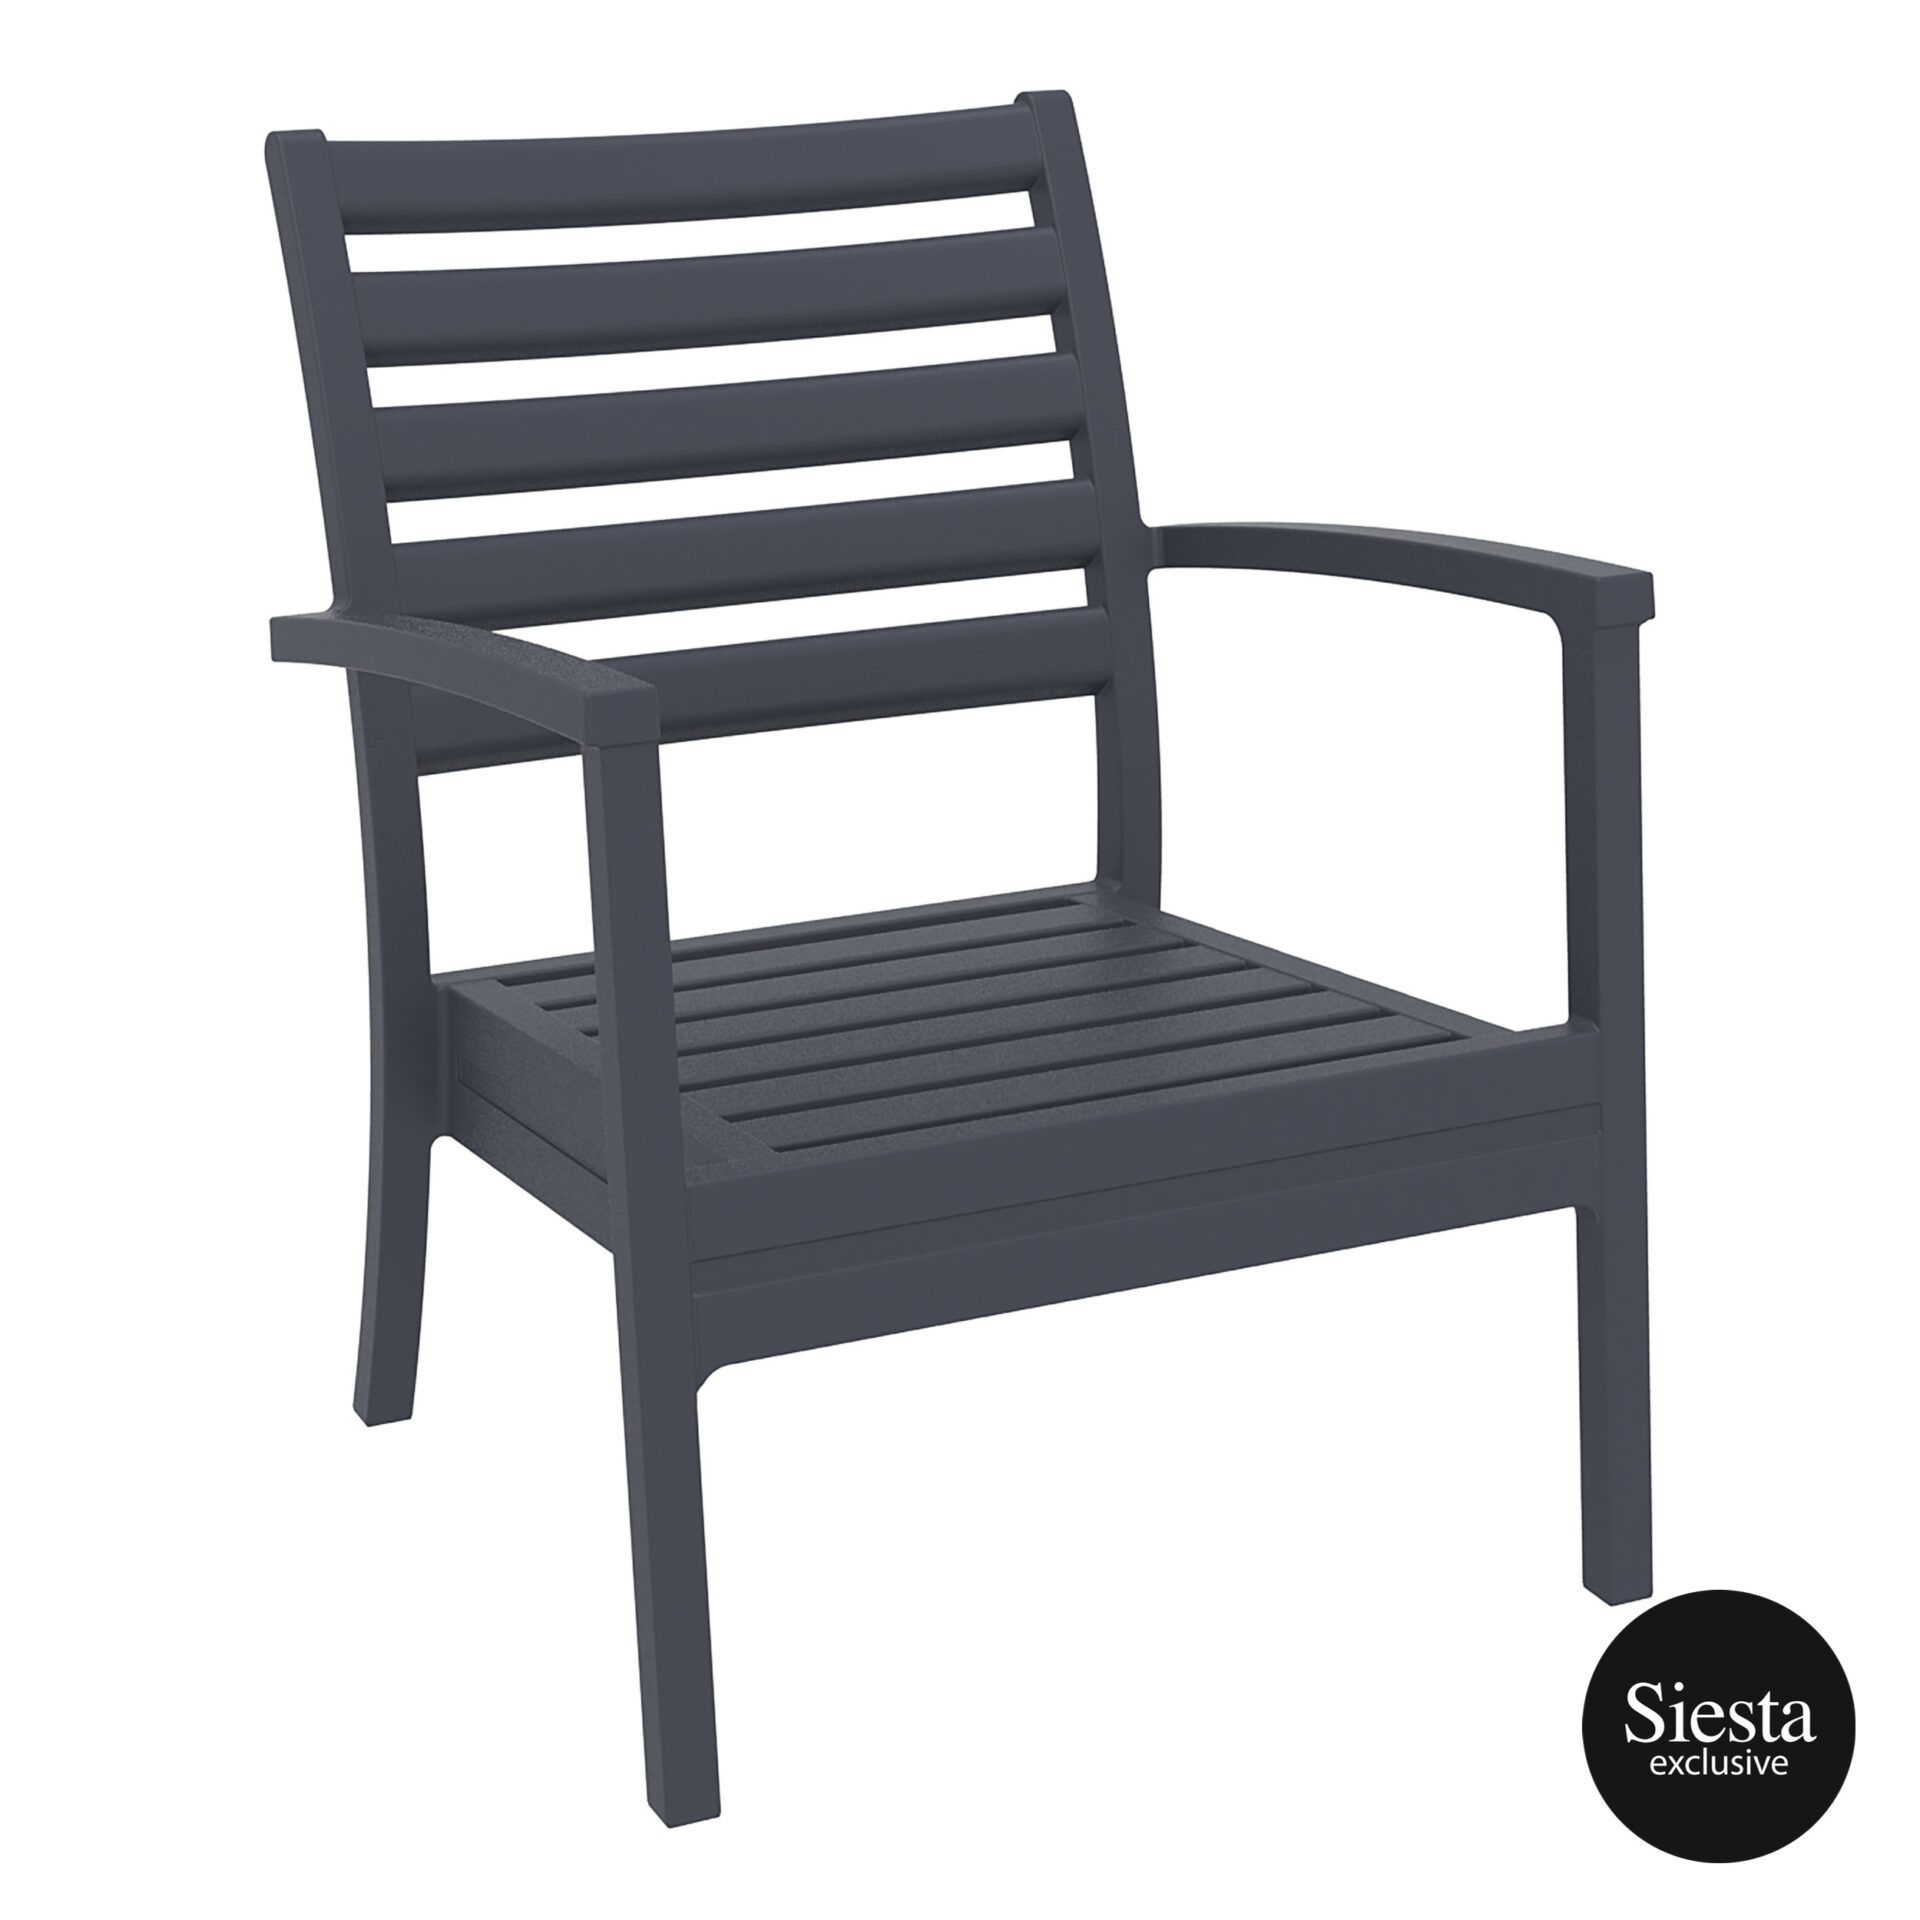 Artemis Outdoor Relax Armchair colour ANTHRACITE available to order now!